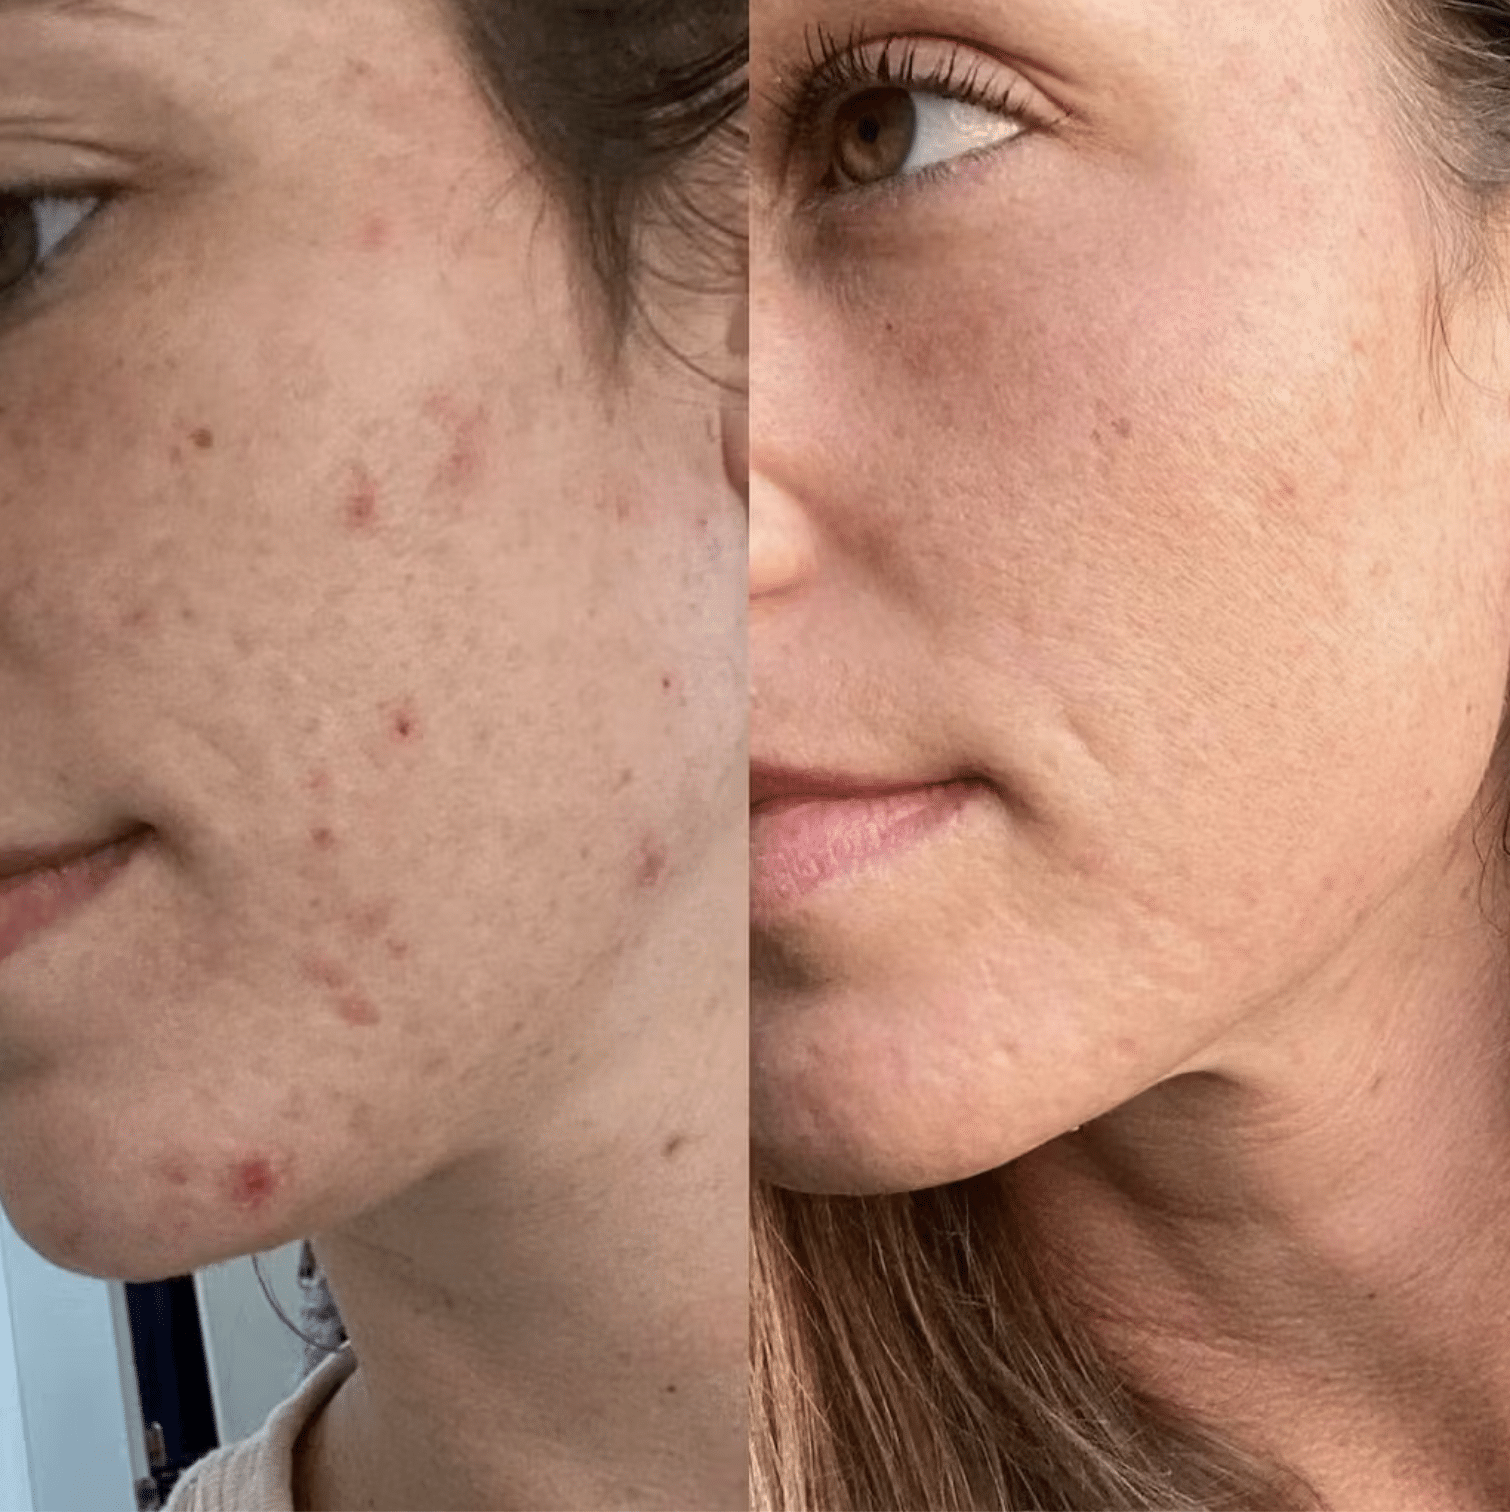 BioLux Light Therapy Mask - Before and After Results